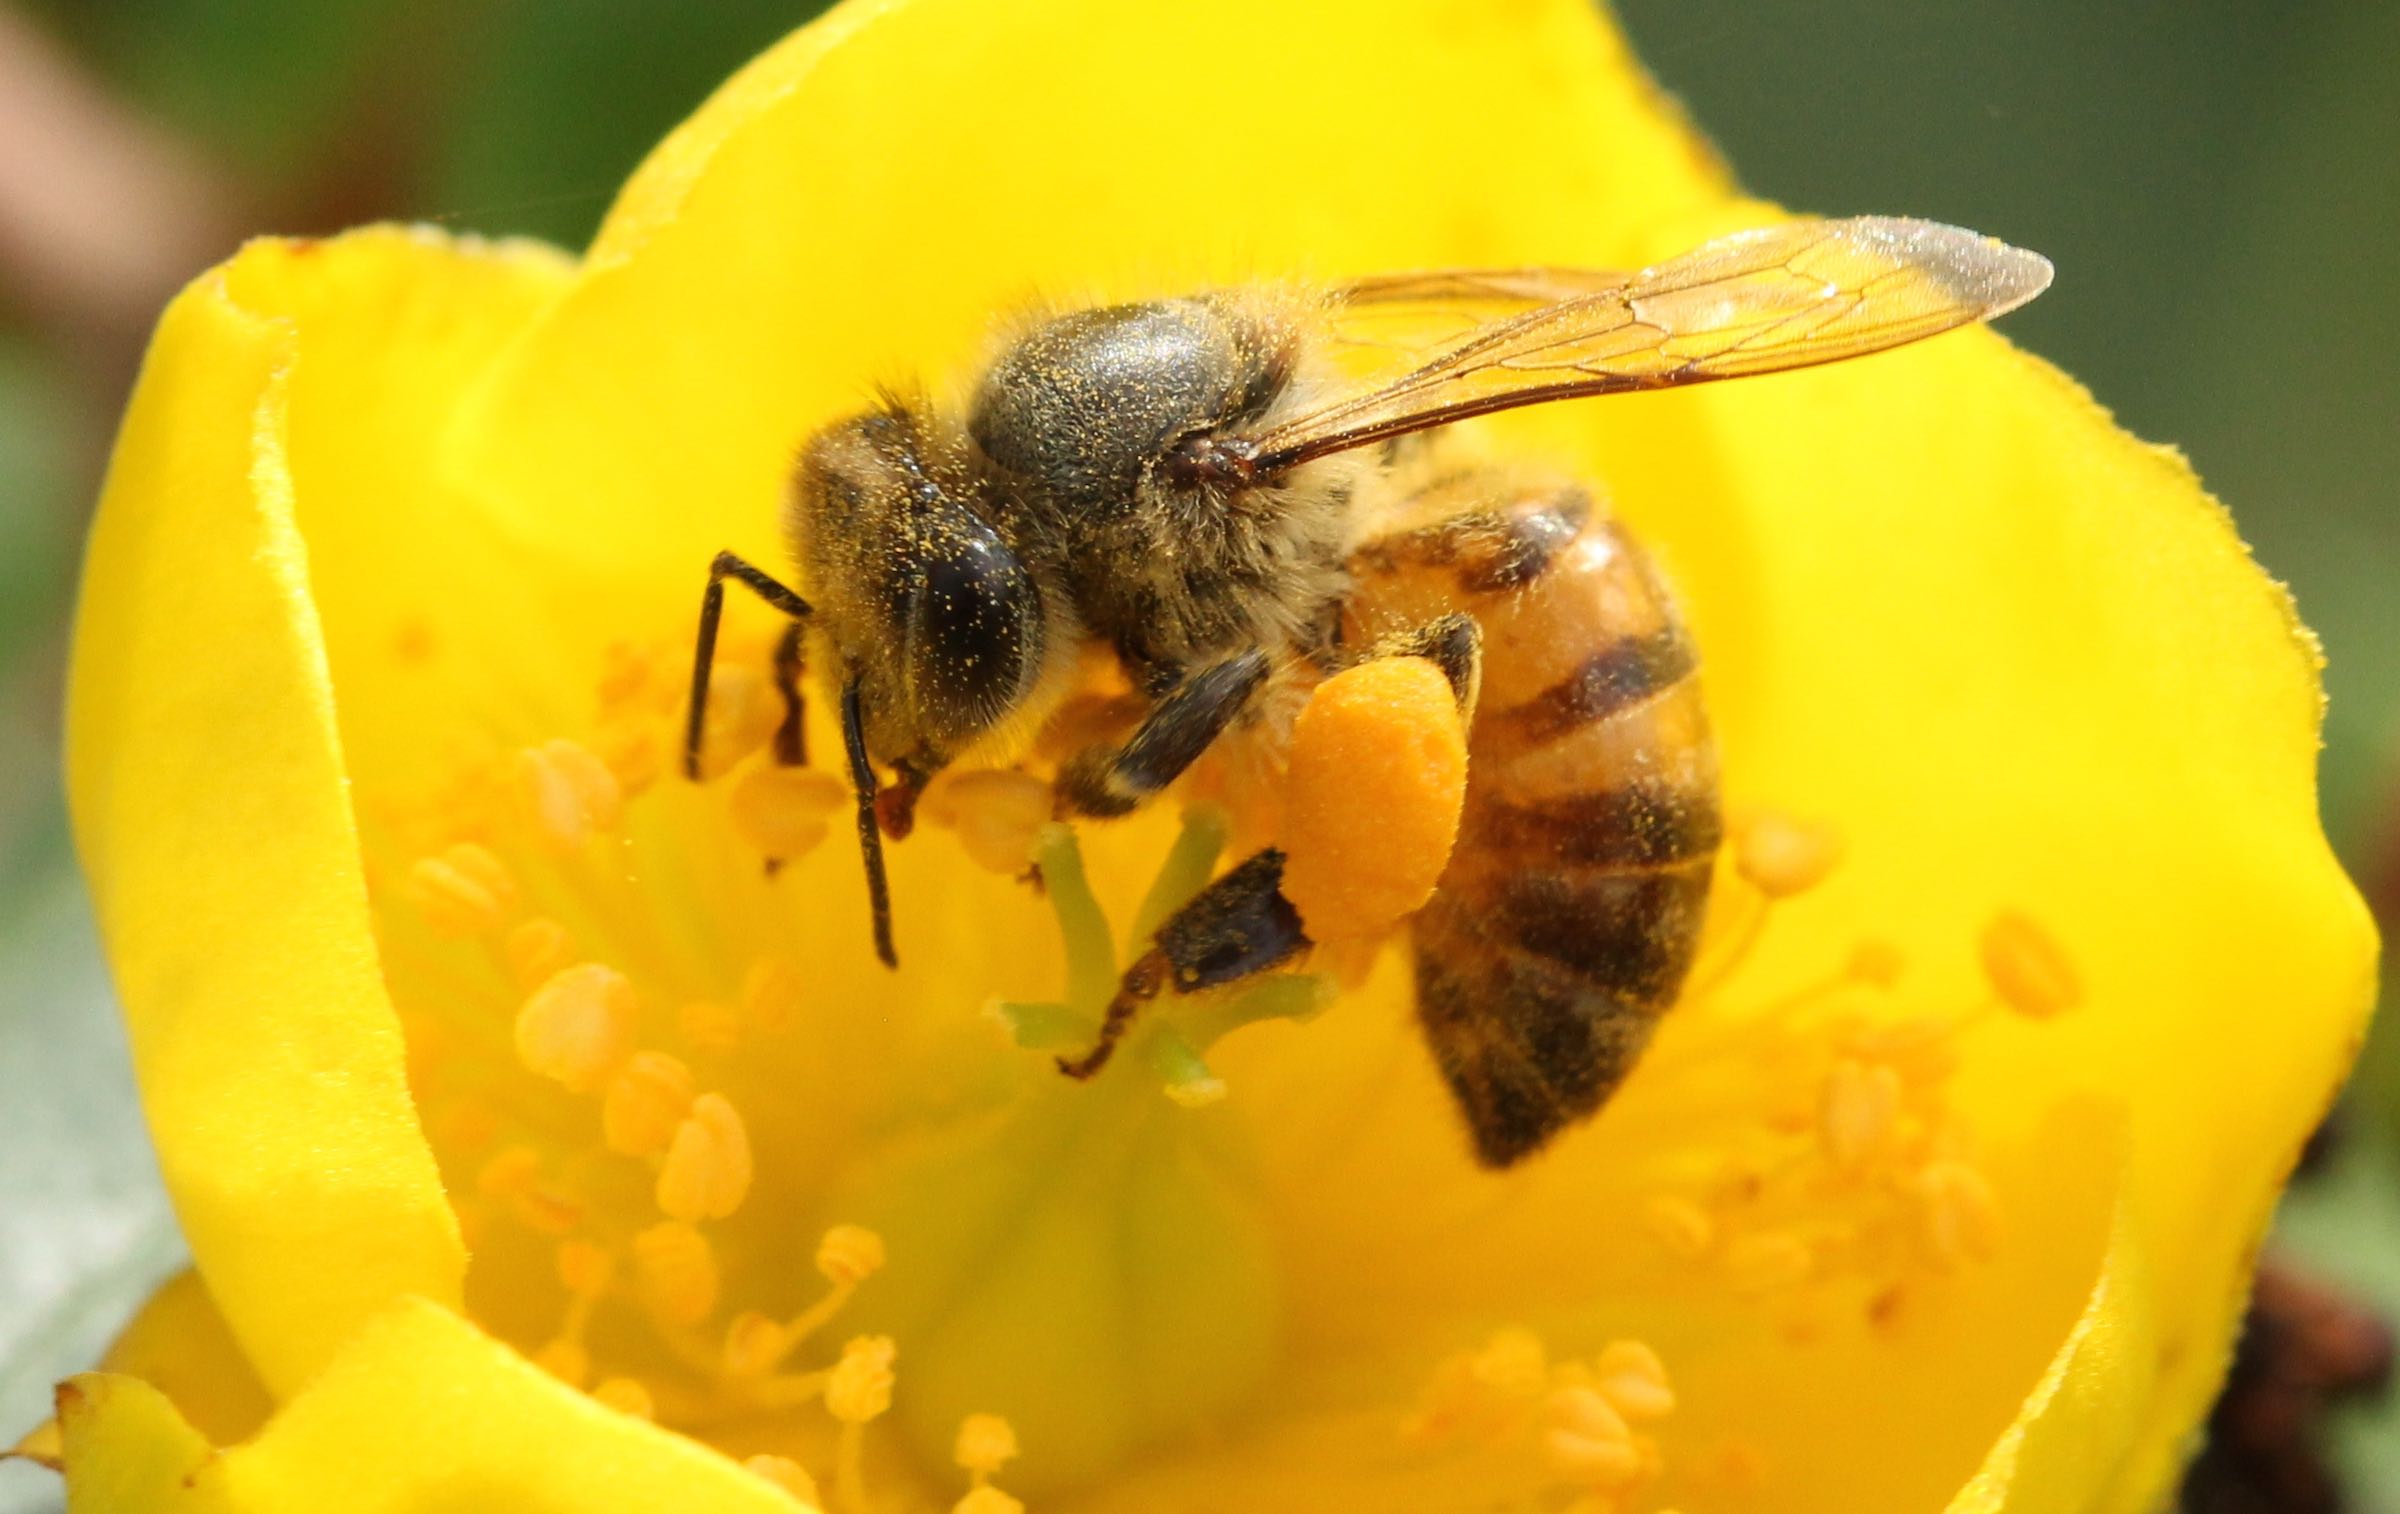 A close up of a honey bee on a yellow flower.